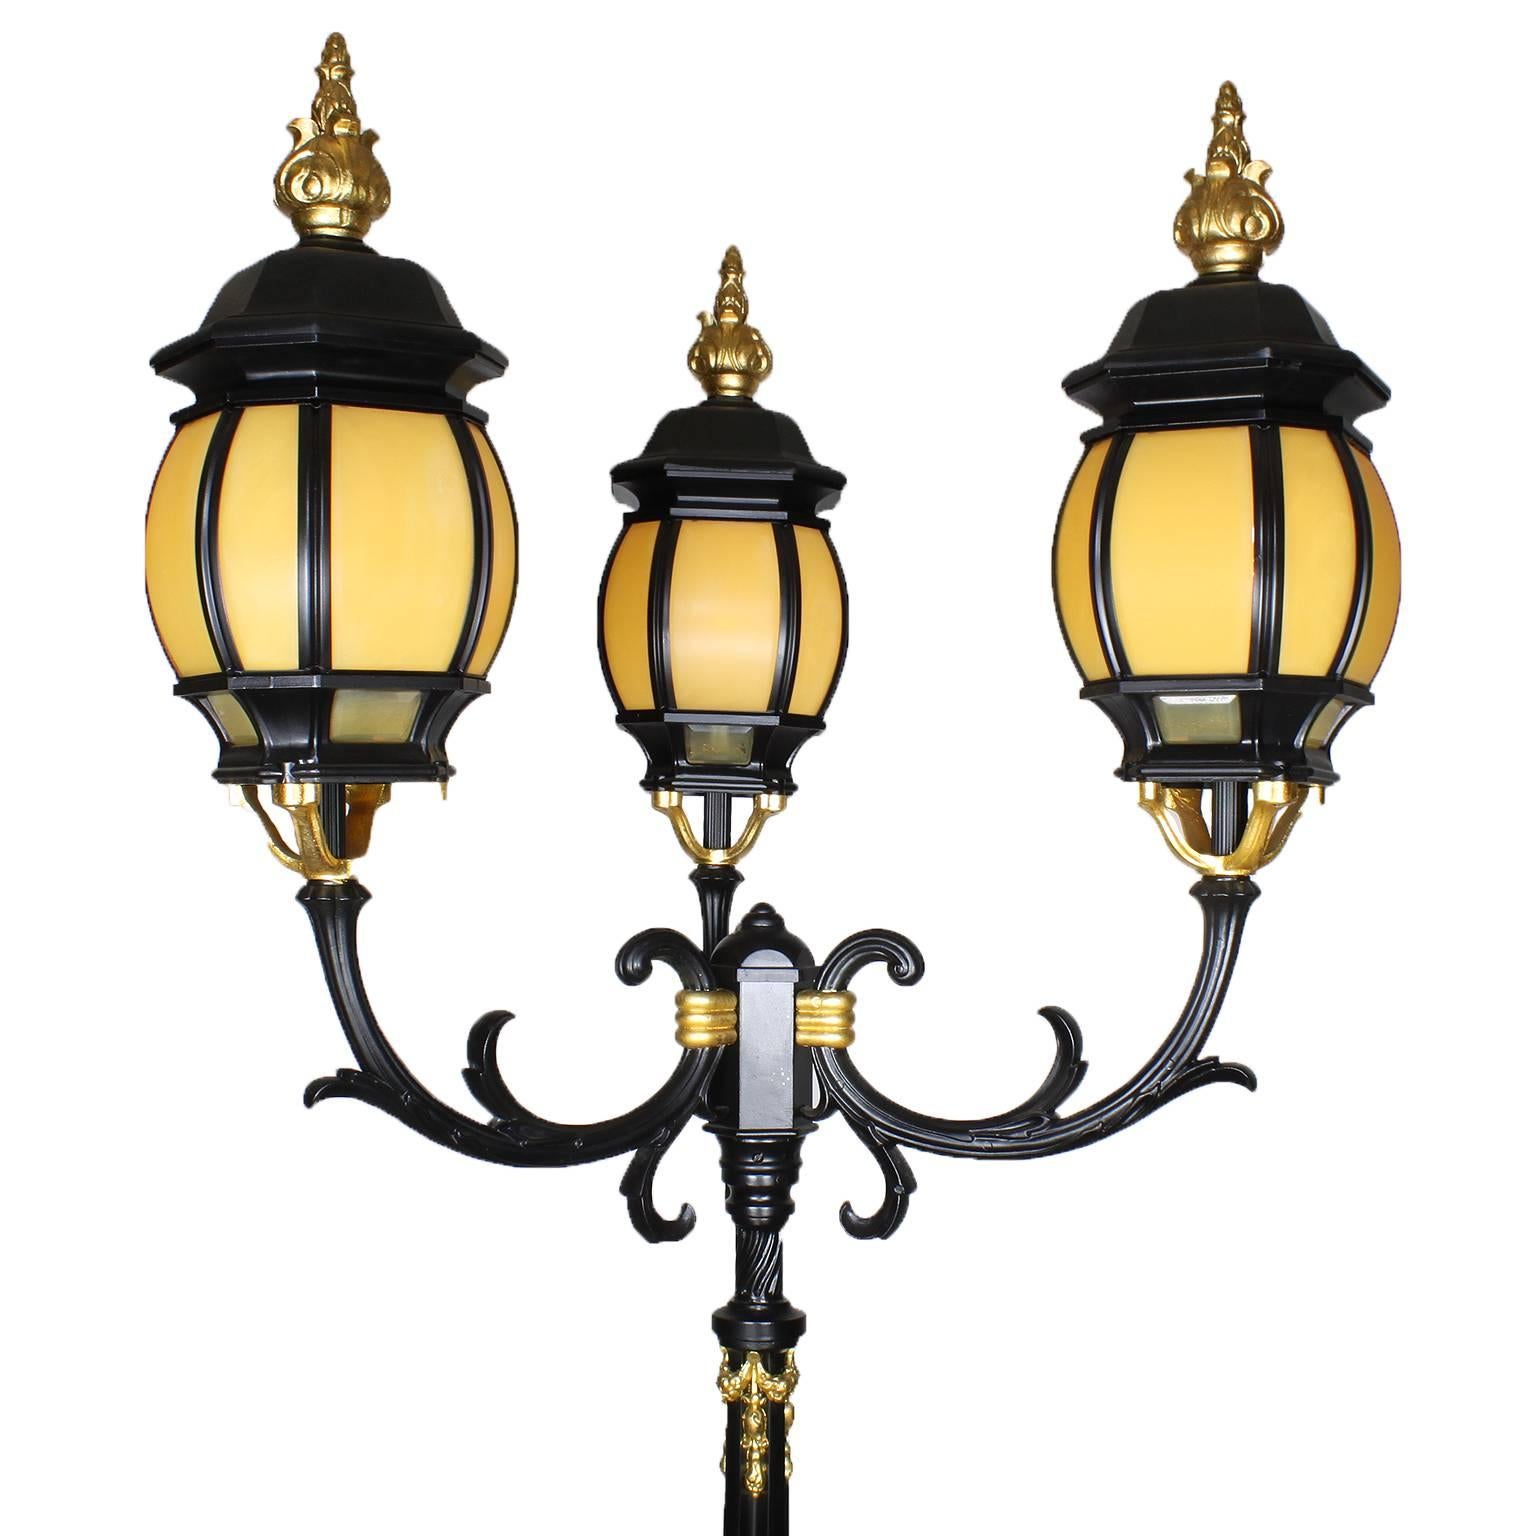 A Palatial Pair of French 19th/20th Century Neoclassical Revival Style Ebonized Cast-Iron and Parcel-Gilt Torcheres (torchières - Lamp Posts). The park-like torcheres surmounted with later three-form metal Lumières with bakelite mounted shades